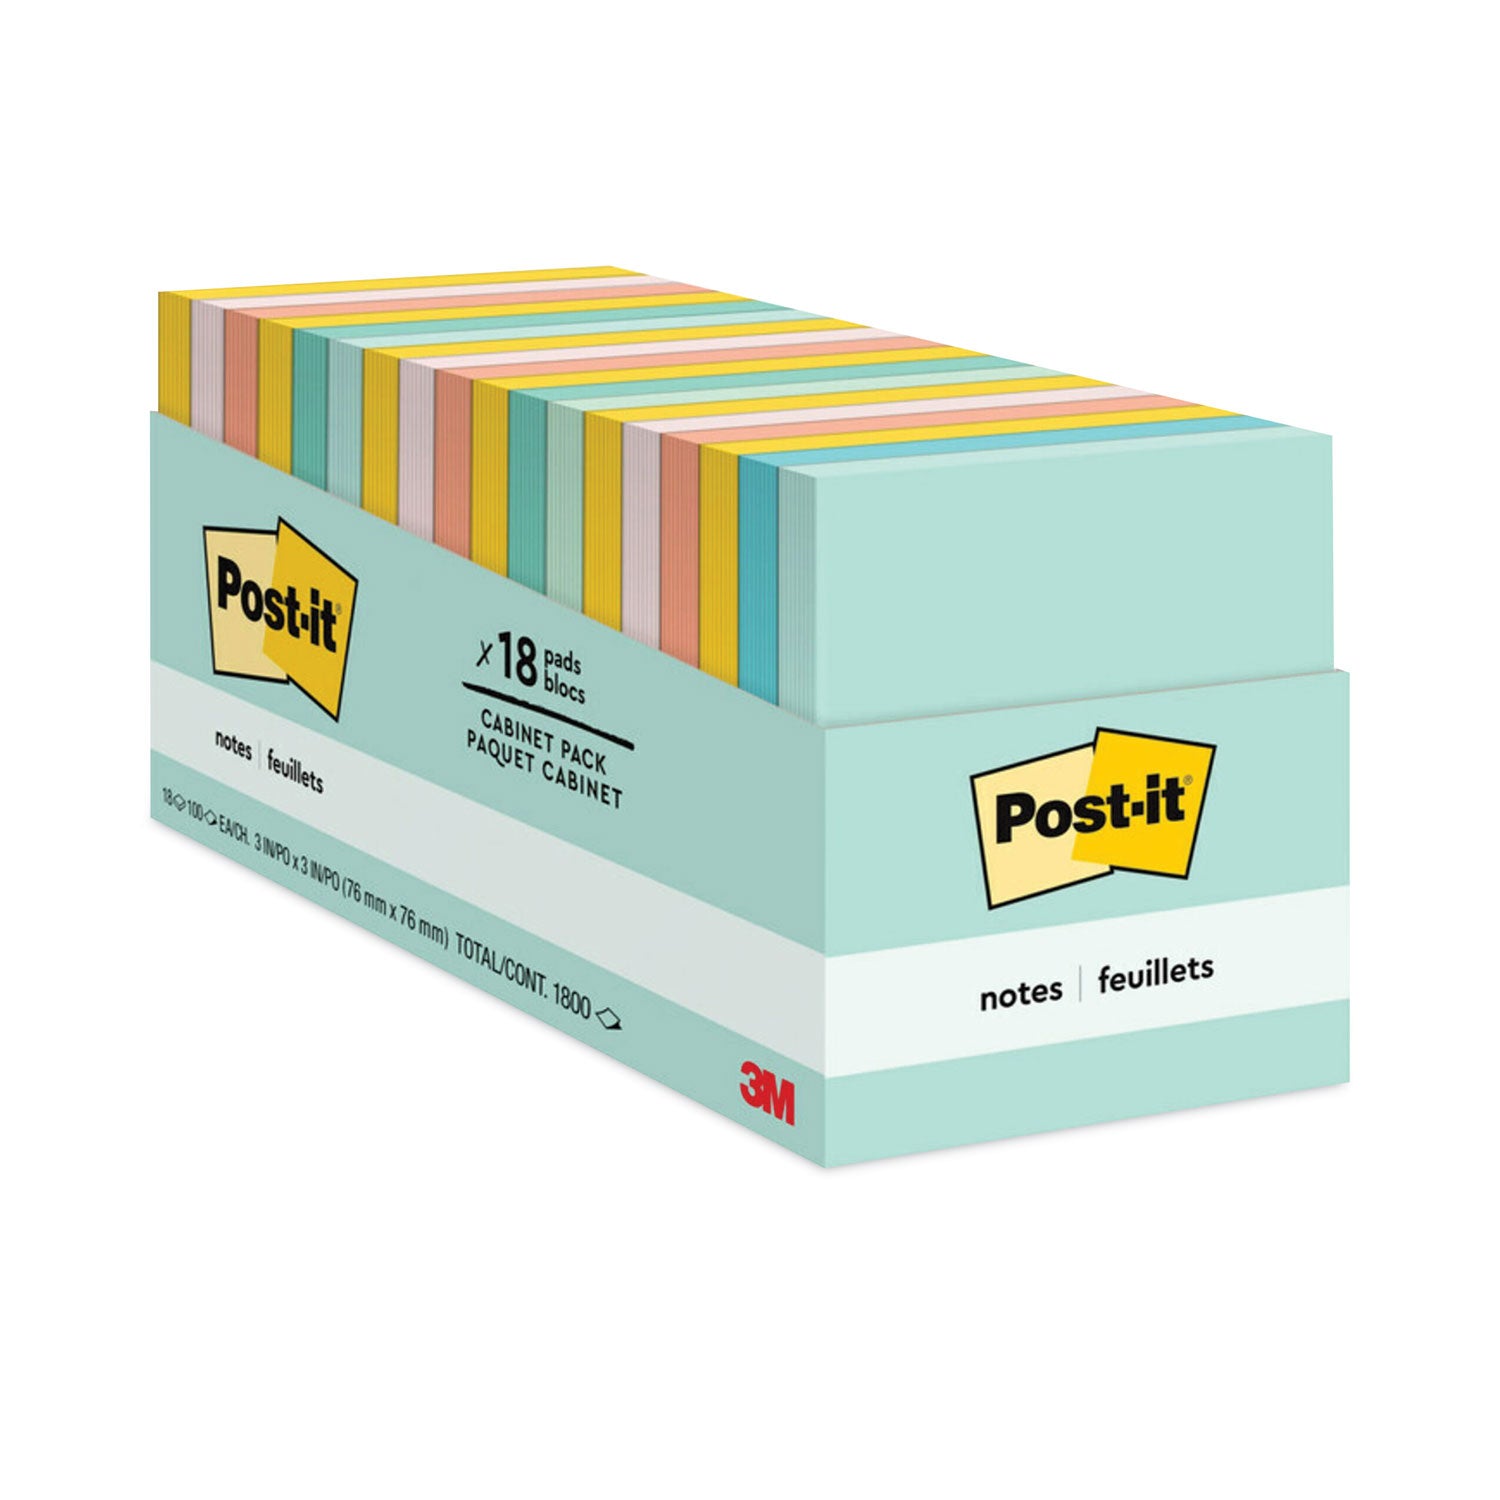 original-pads-in-beachside-cafe-collection-colors-cabinet-pack-3-x-3-100-sheets-pad-18-pads-pack_mmm65418apcppk - 1